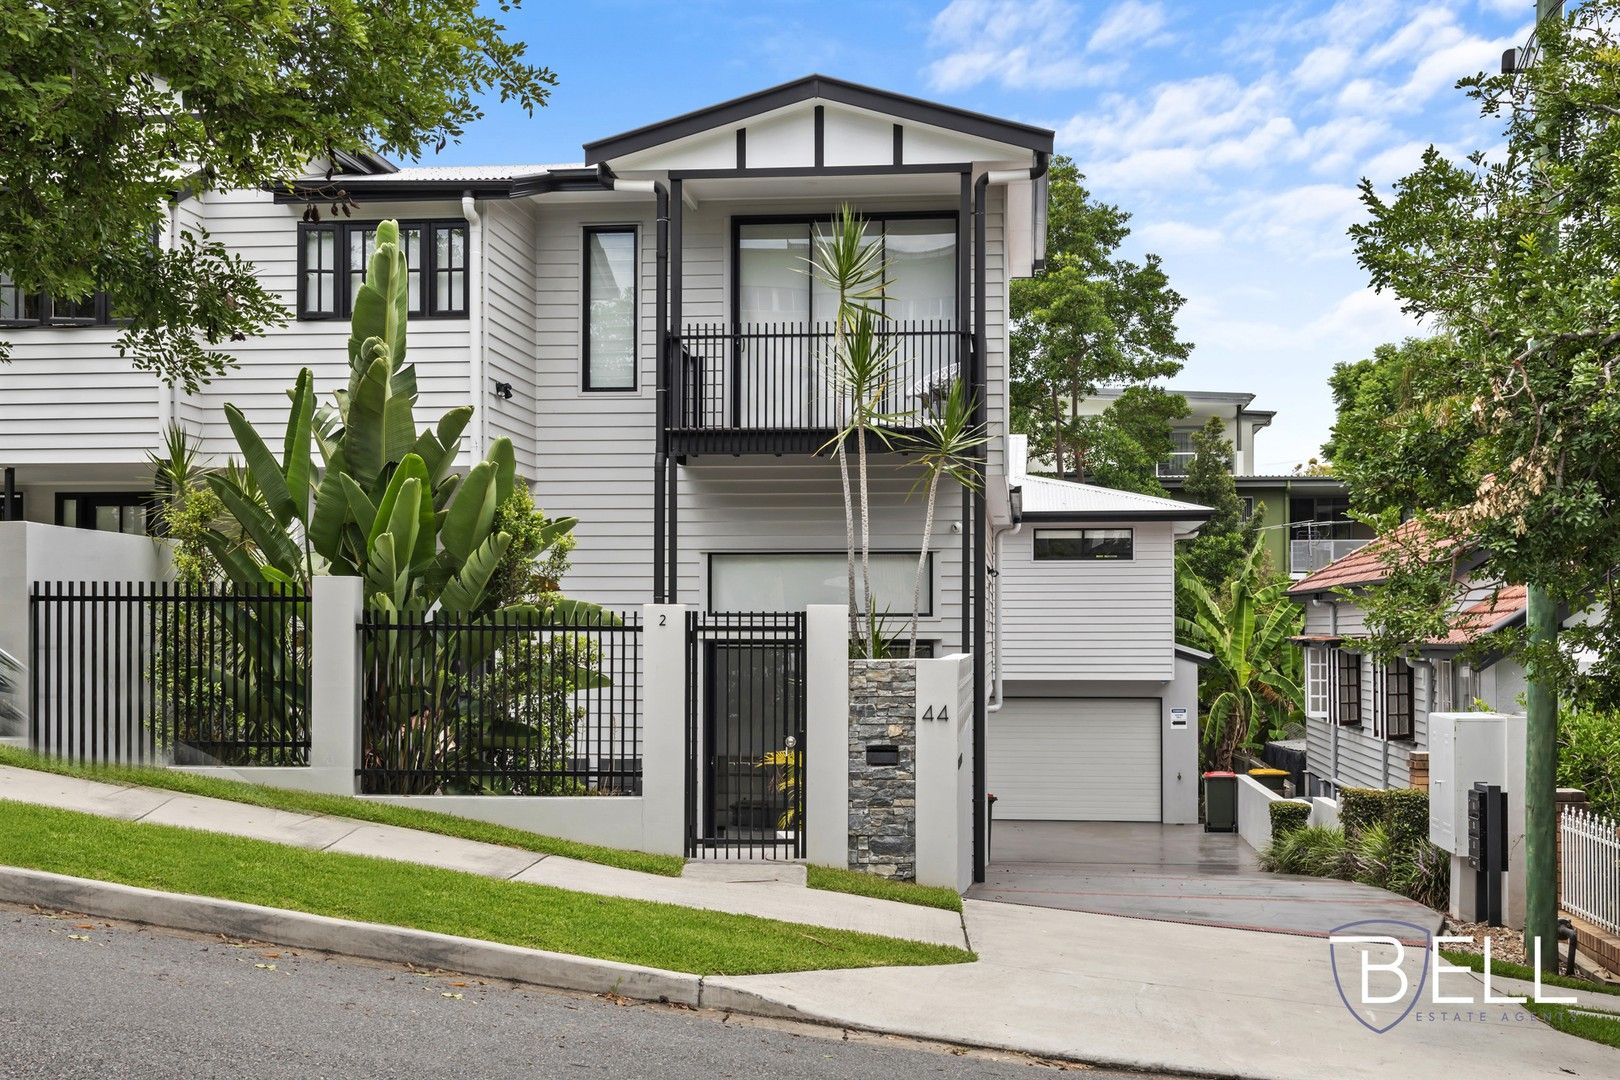 3 bedrooms Townhouse in 2/44 Beth Eden Terrace ASHGROVE QLD, 4060